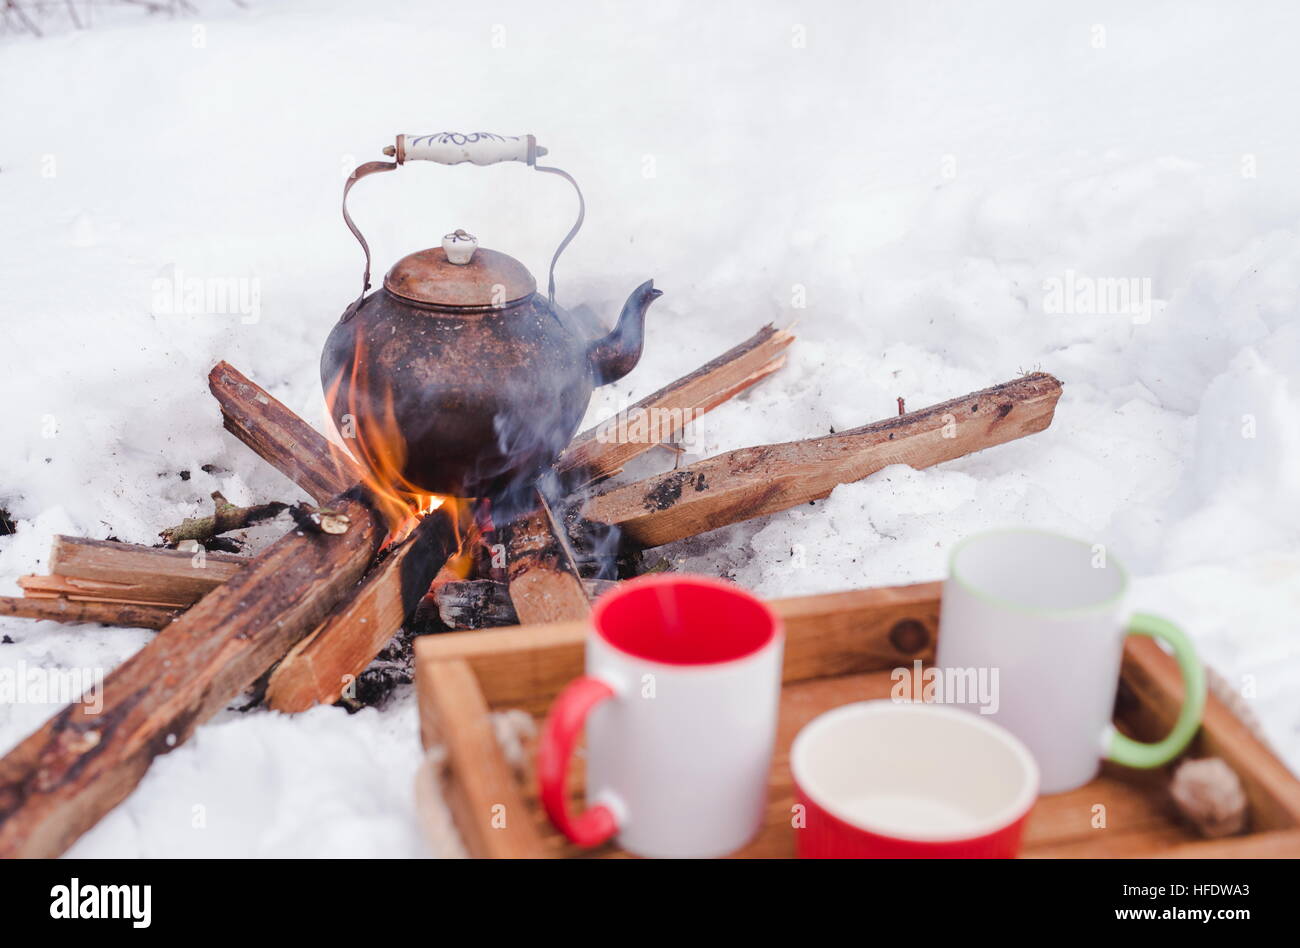 Romantic winter picnic. Two cups and a bowl on a wooden tray in snow. Copper kettle over an open fire on background, blurred. Boiling kettle on firewo Stock Photo